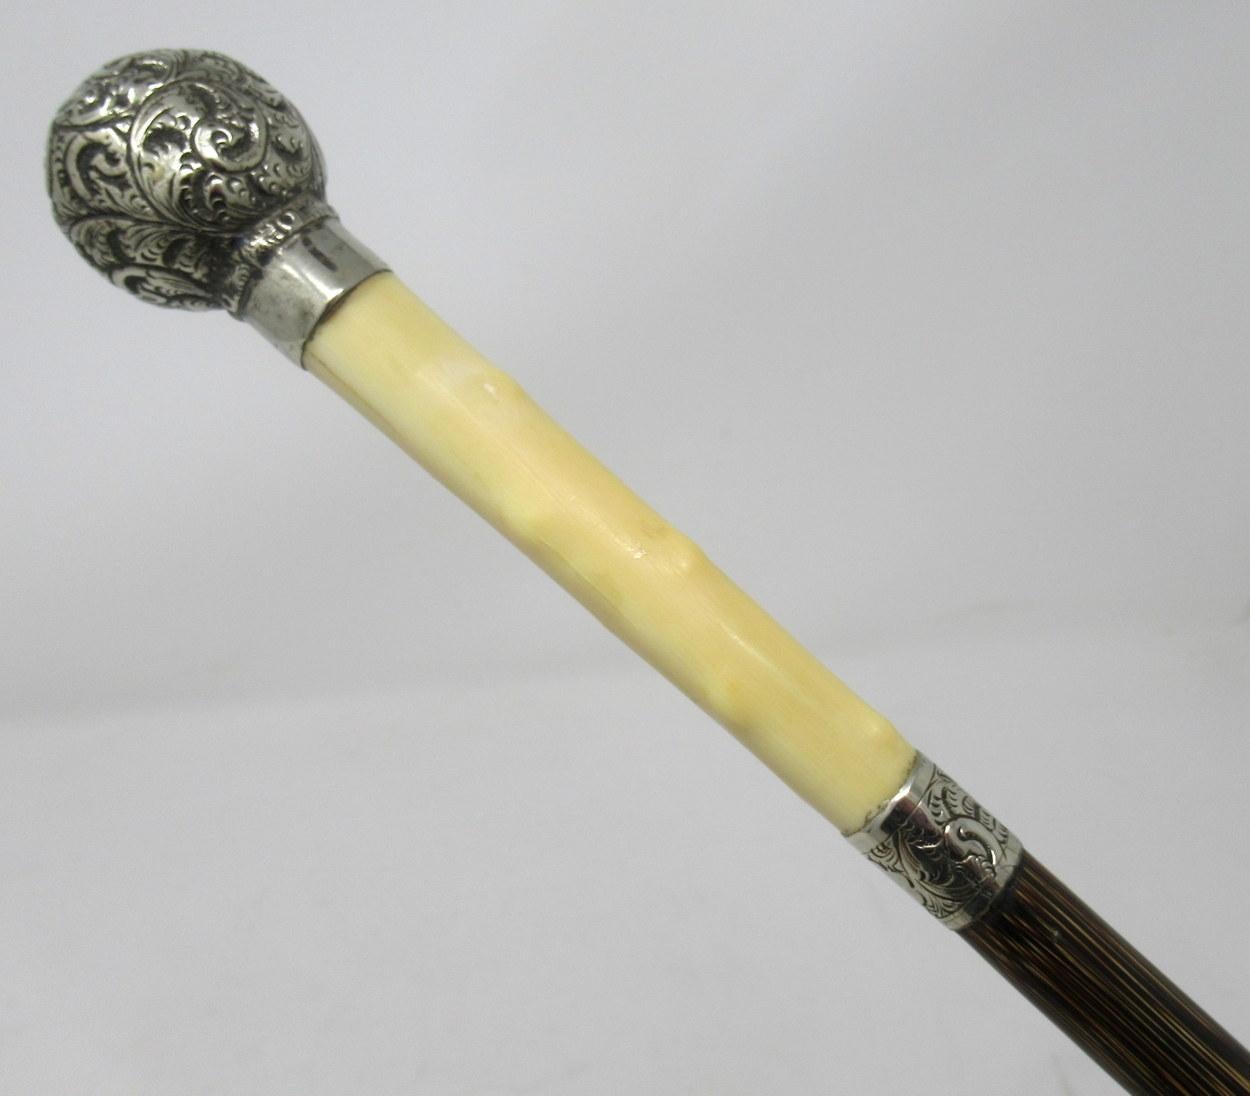 Fine quality well figured walking cane with highly decorative embossed silver plated ball grip above a carved boar tusk insert which is ending on a banded Partridgewood shaft, late 19th century. 

The later plain metal ferrule is polished brass.